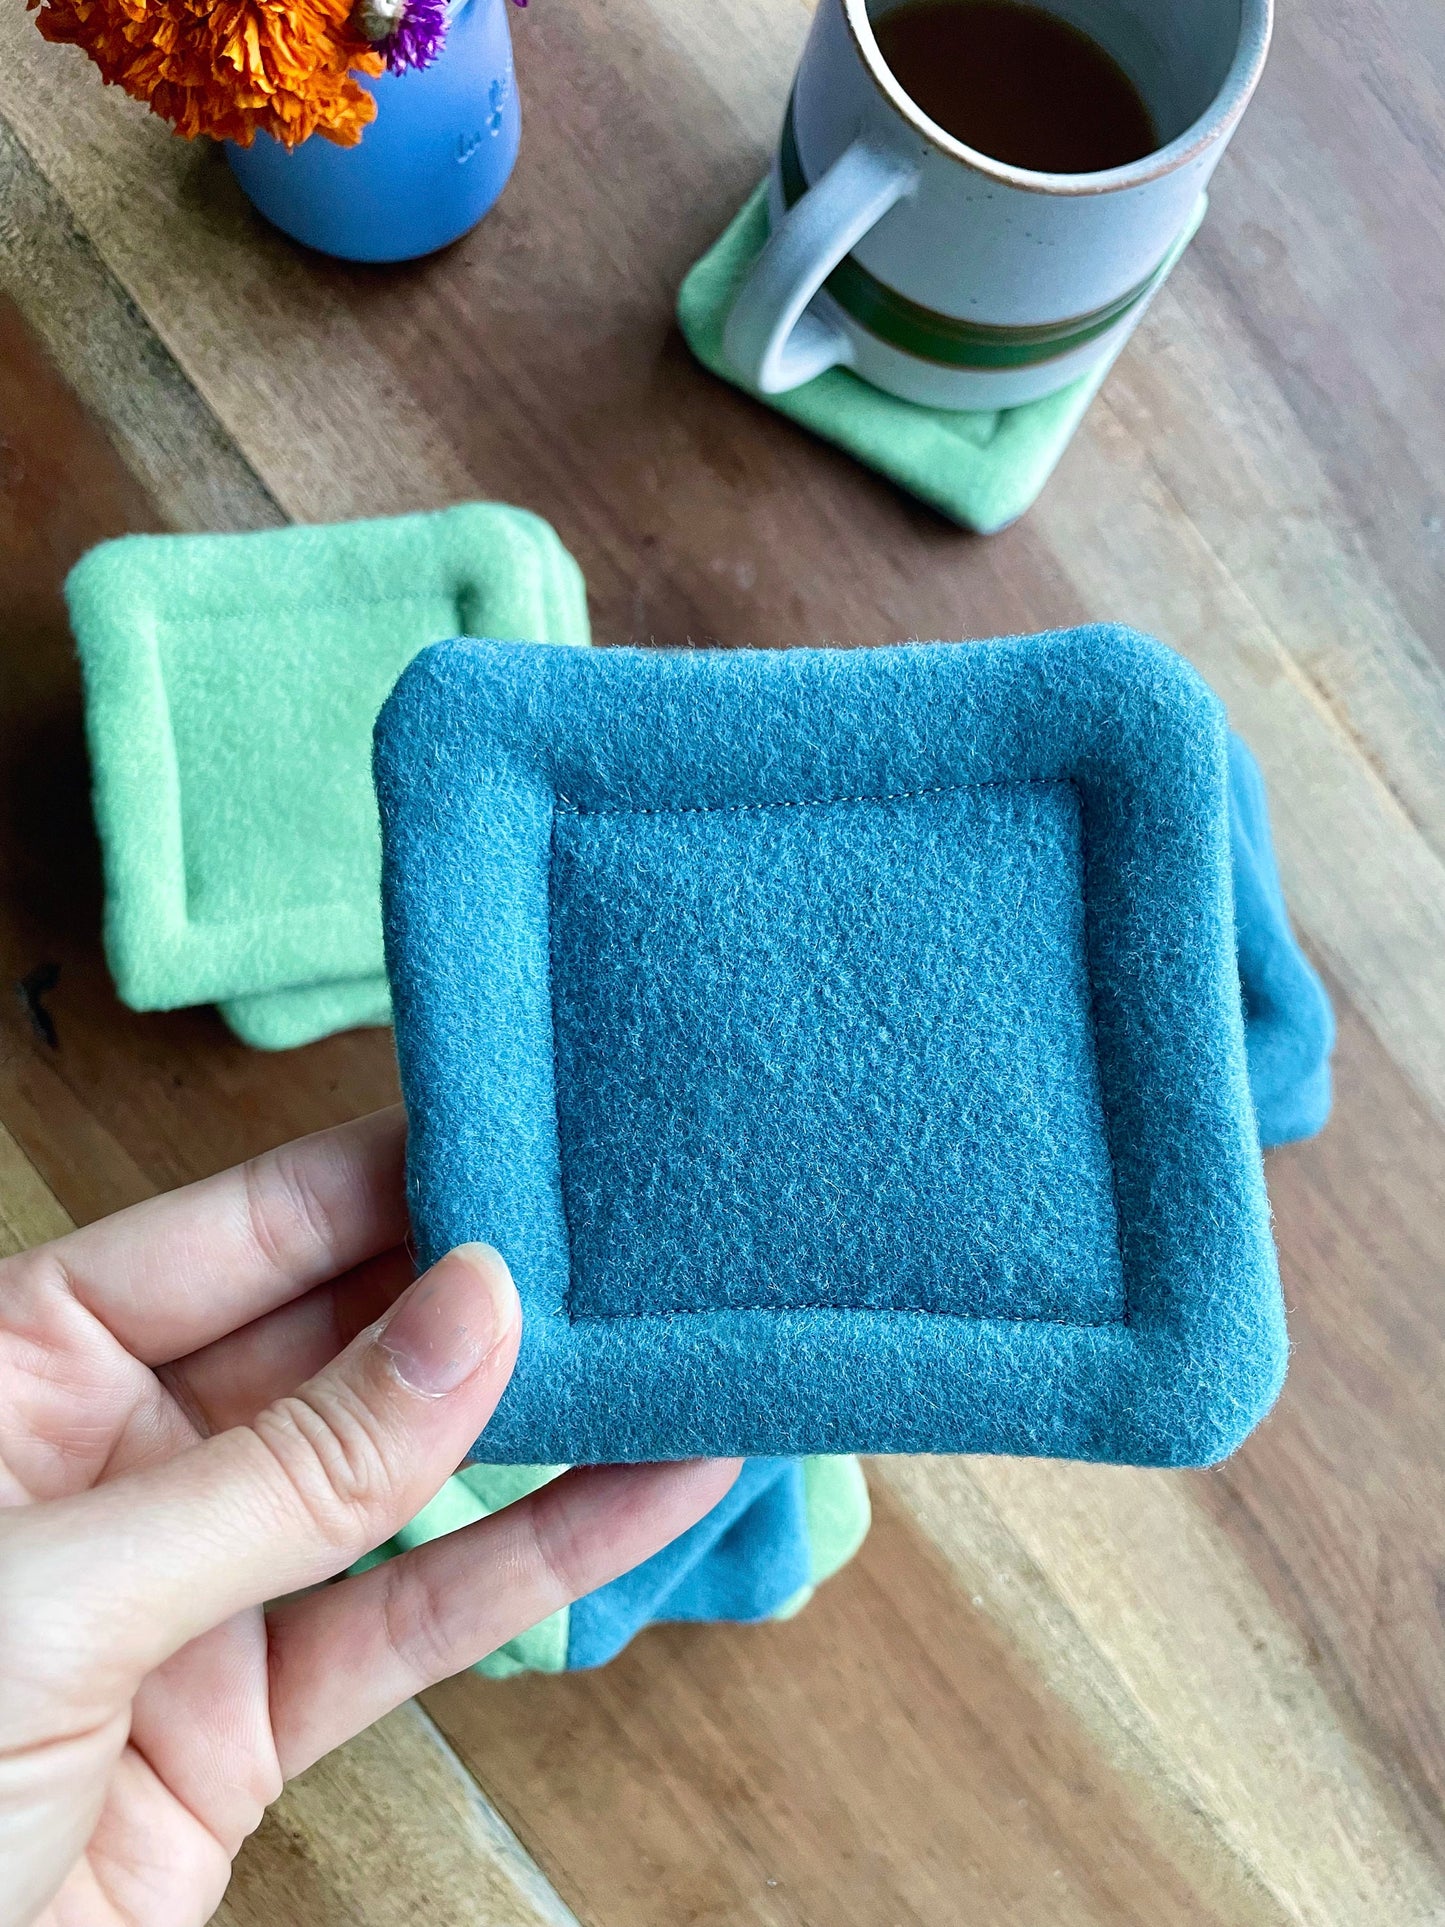 Blue Fabric Coasters - Recycled Boiled Wool and Denim